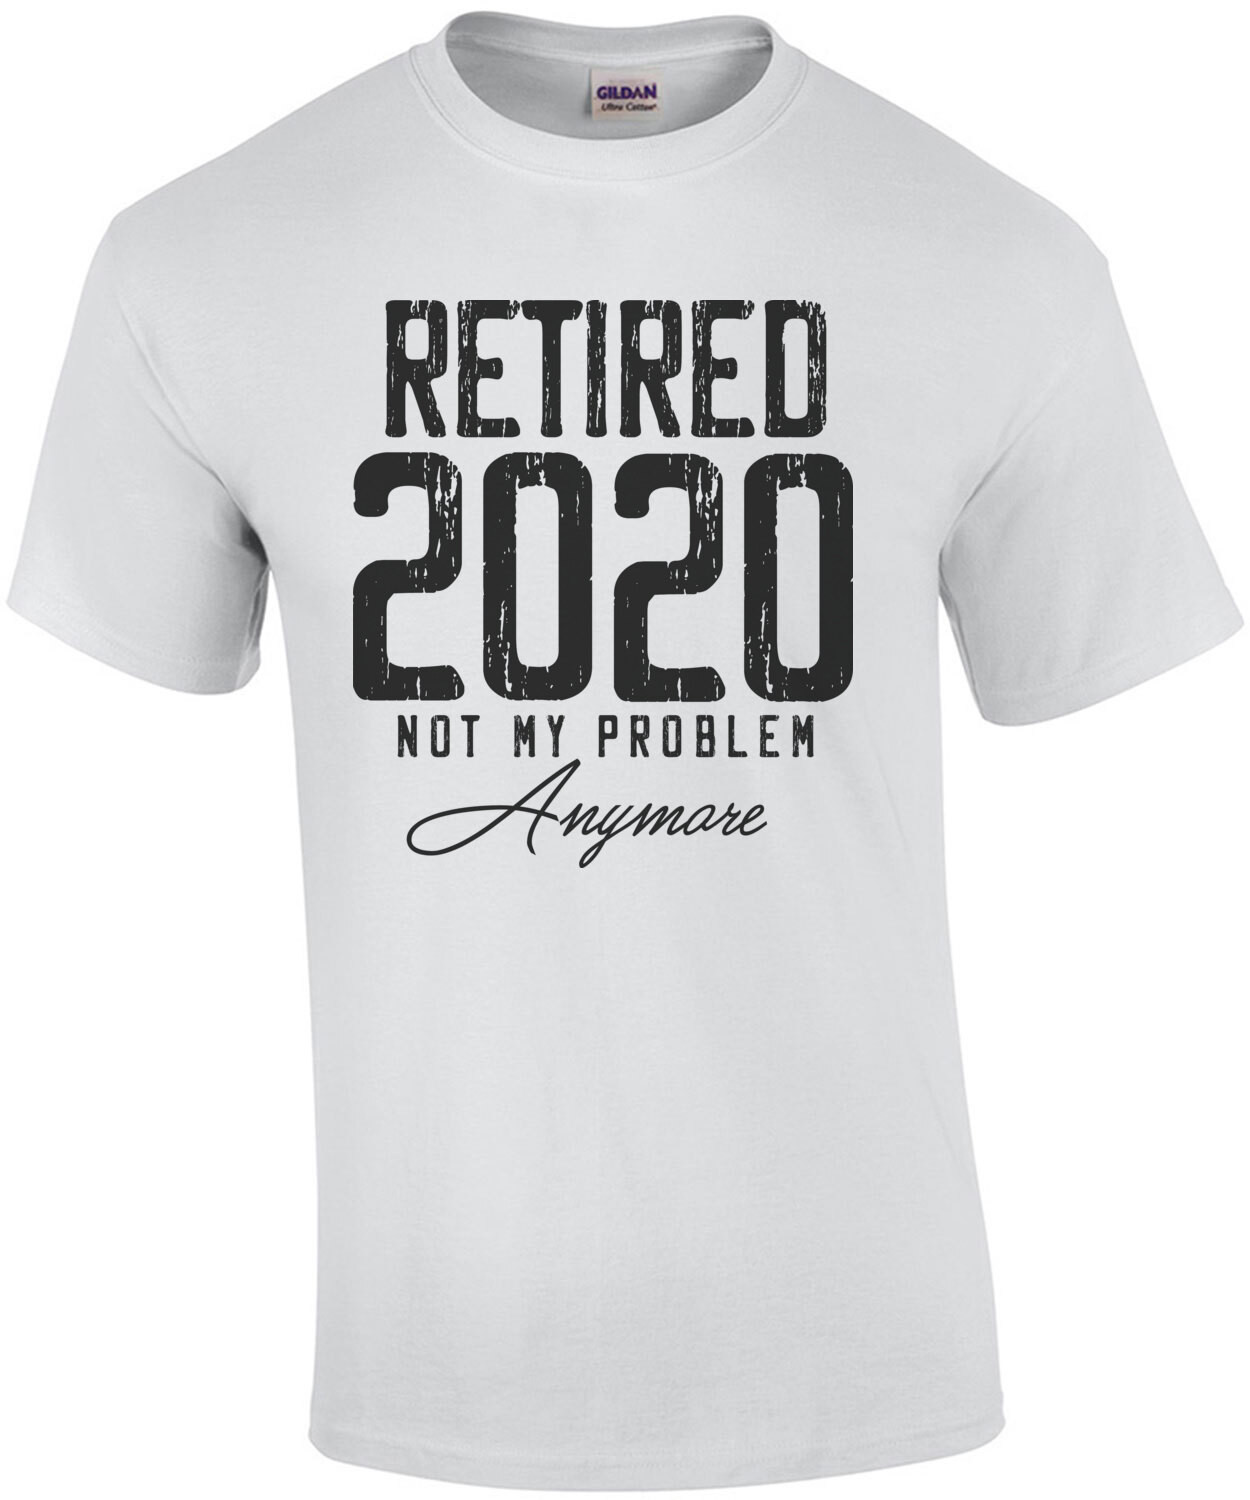 Retired 2020 - Not my problem anymore - retirement t-shirt